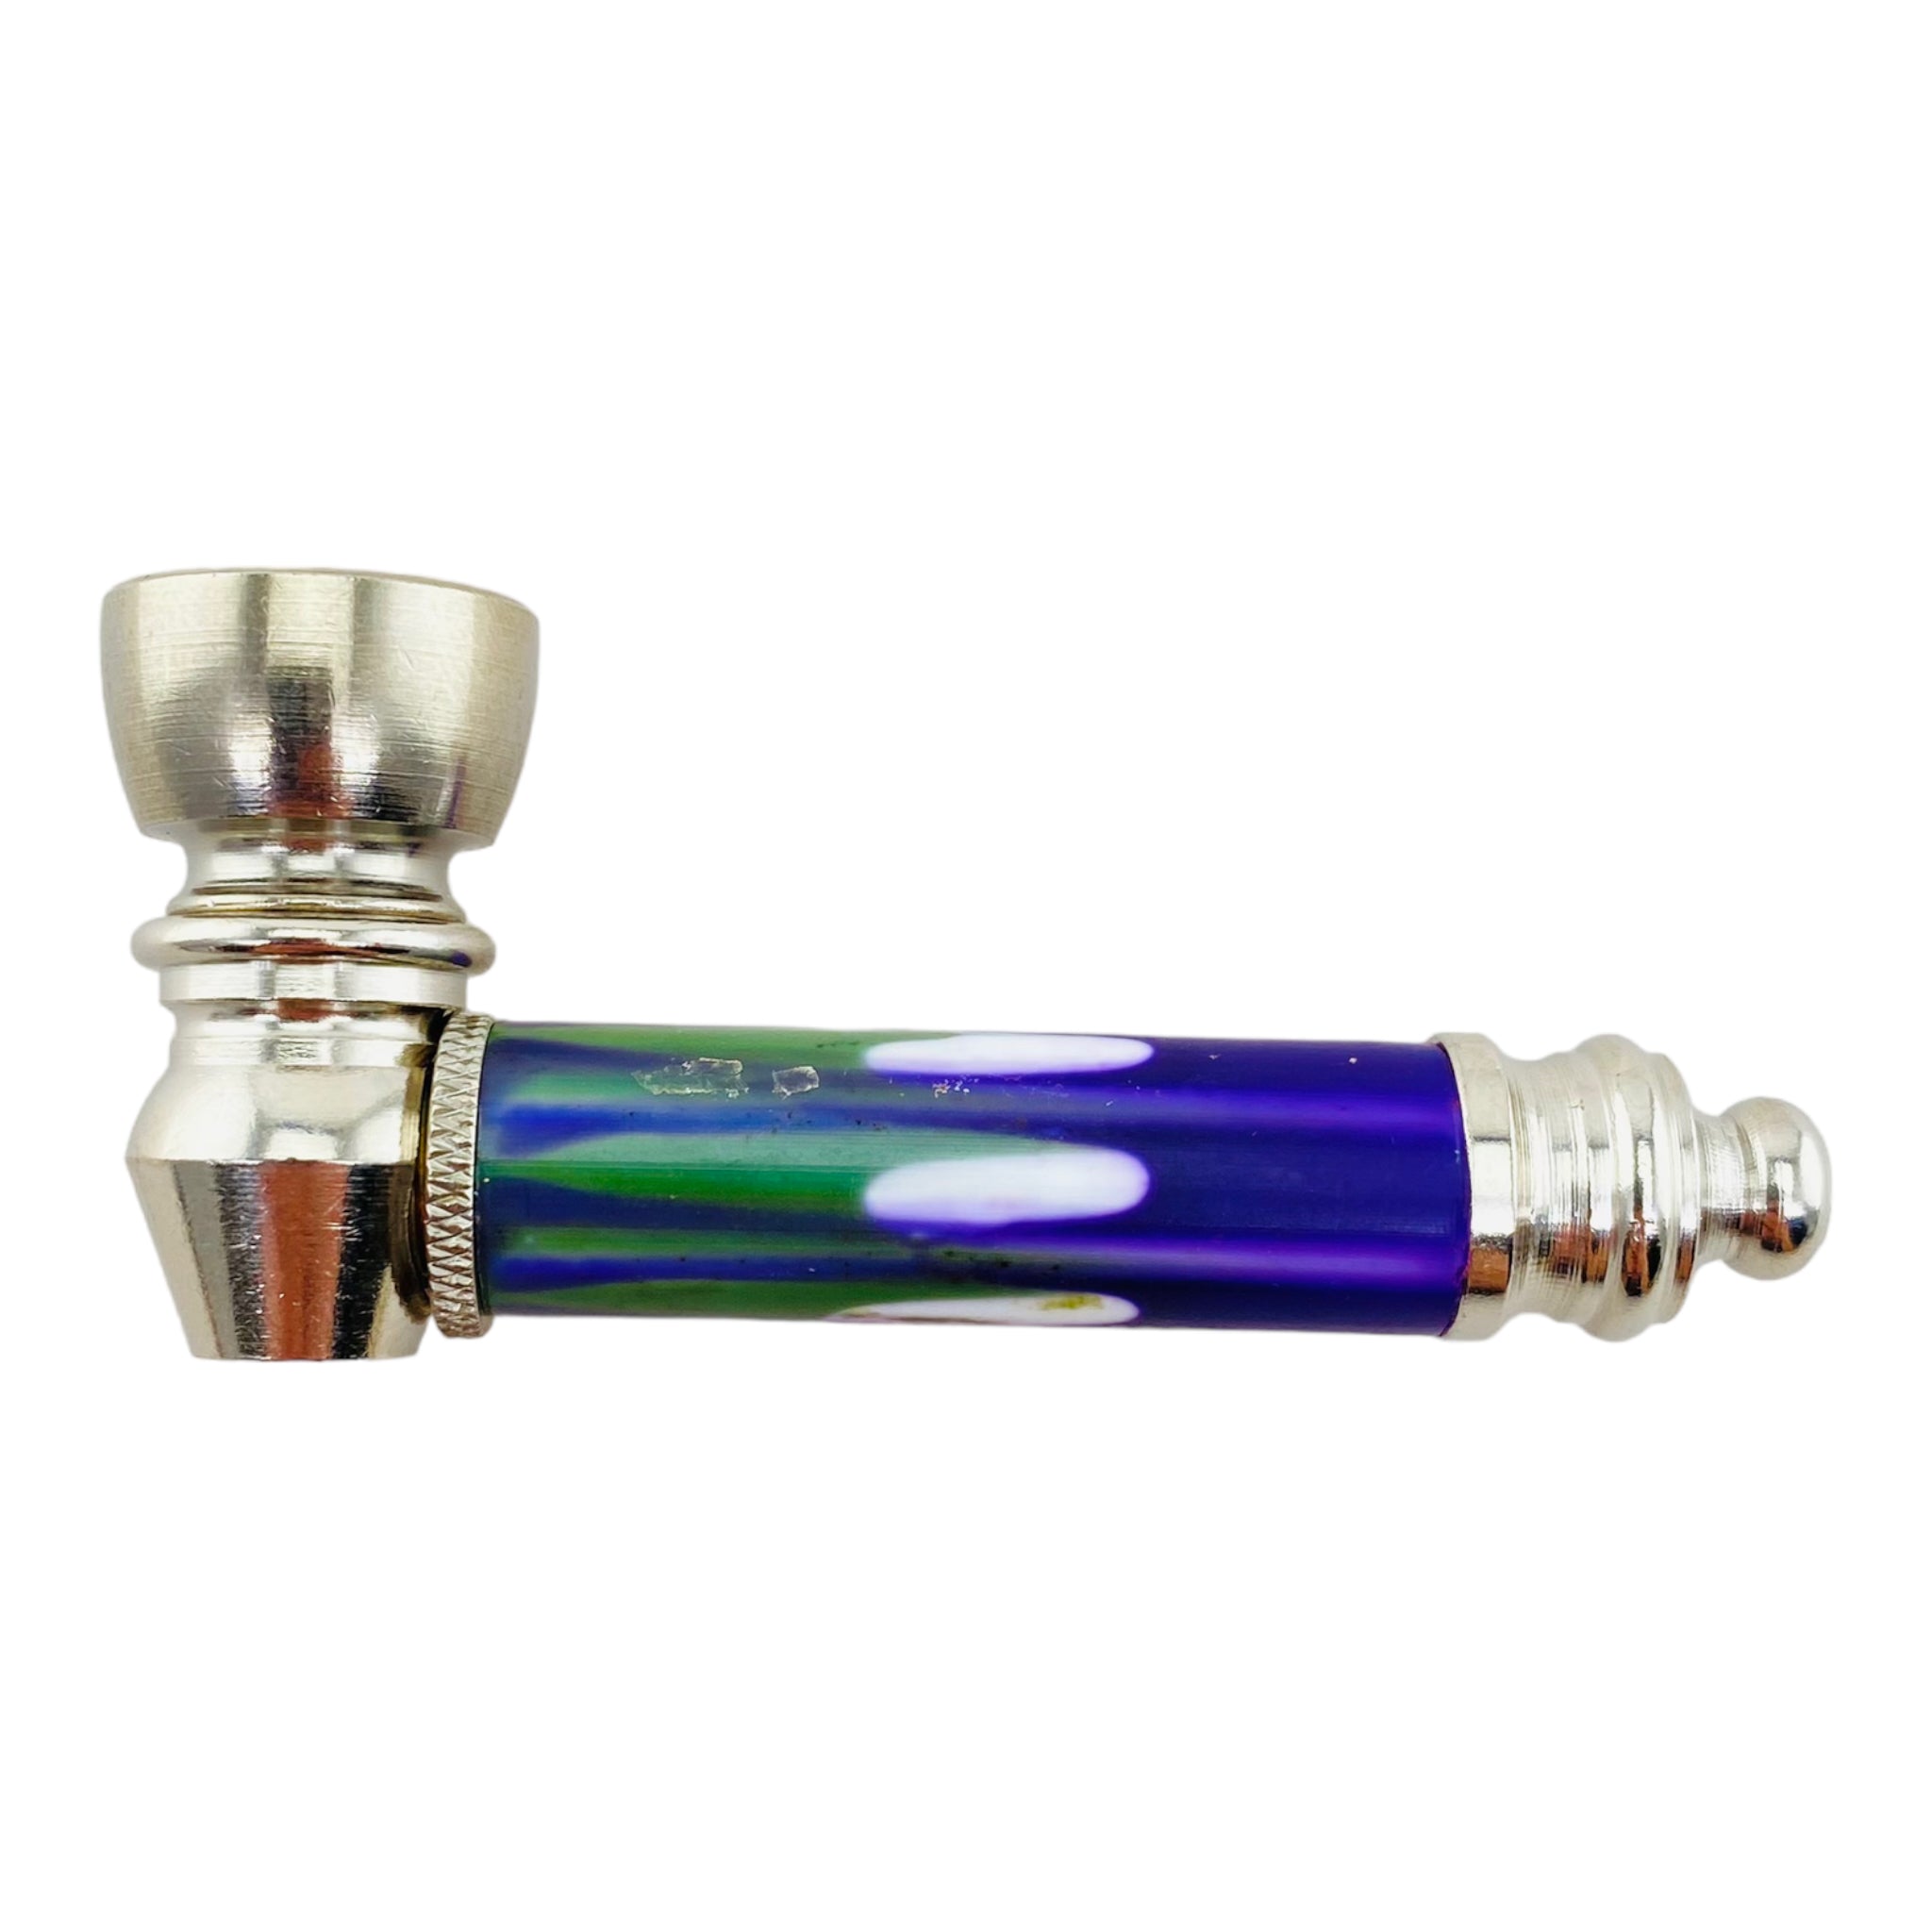 Metal Hand Pipes - Silver Chrome Hand Pipe With Decorative Green And Blue Plastic Stem